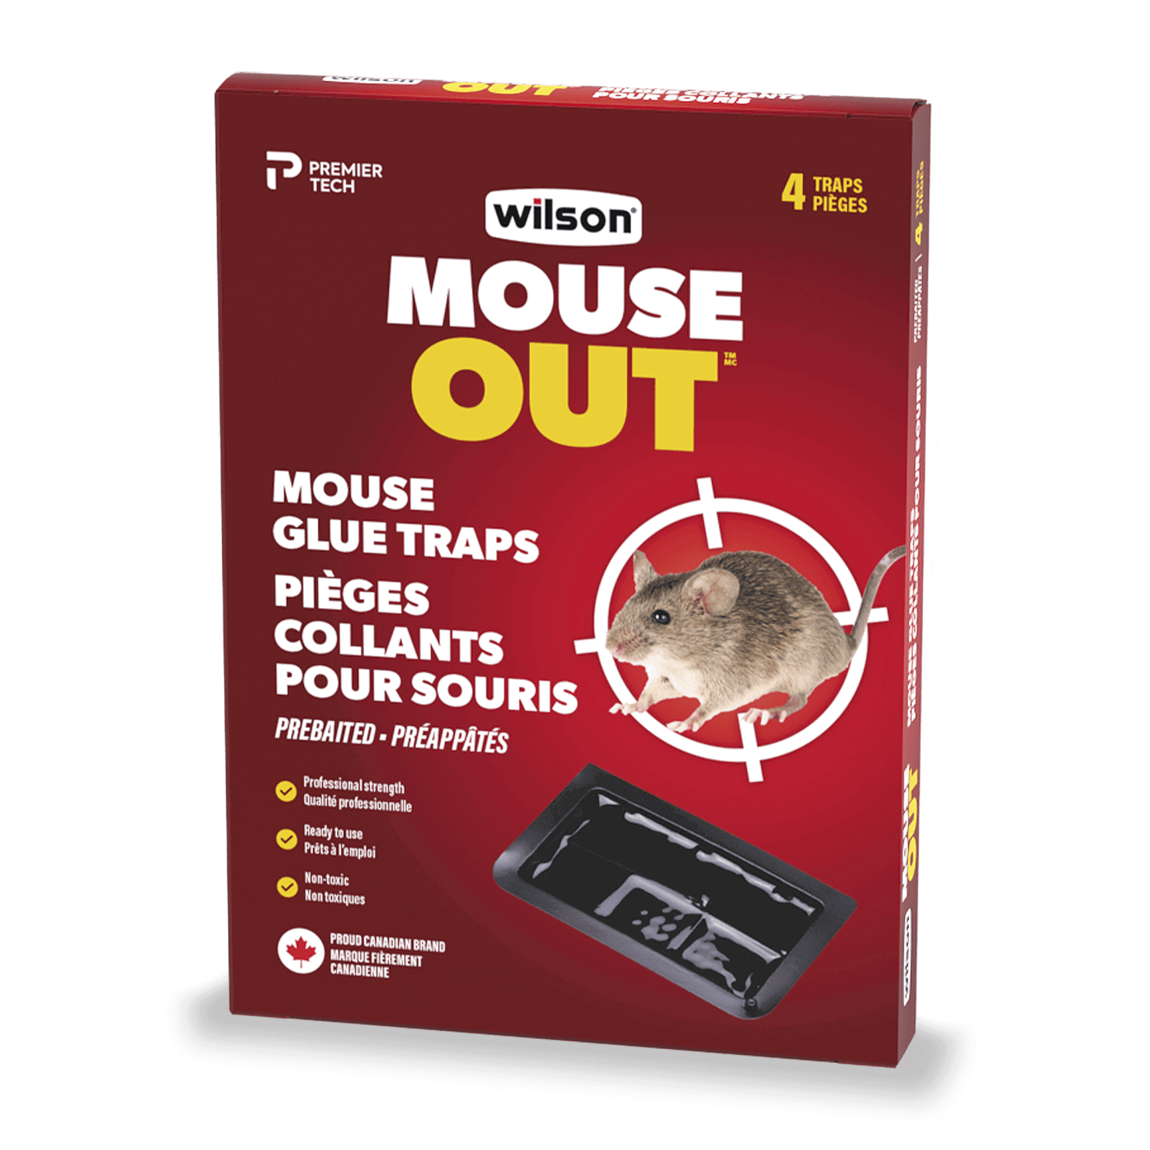 https://www.wilsoncontrol.com/sites/ptgc_wilson/files/styles/swiper_gallery_image/public/2022-01/wilson-mouse-out-mouse-glue-traps-4traps.png?itok=-R91P4S3